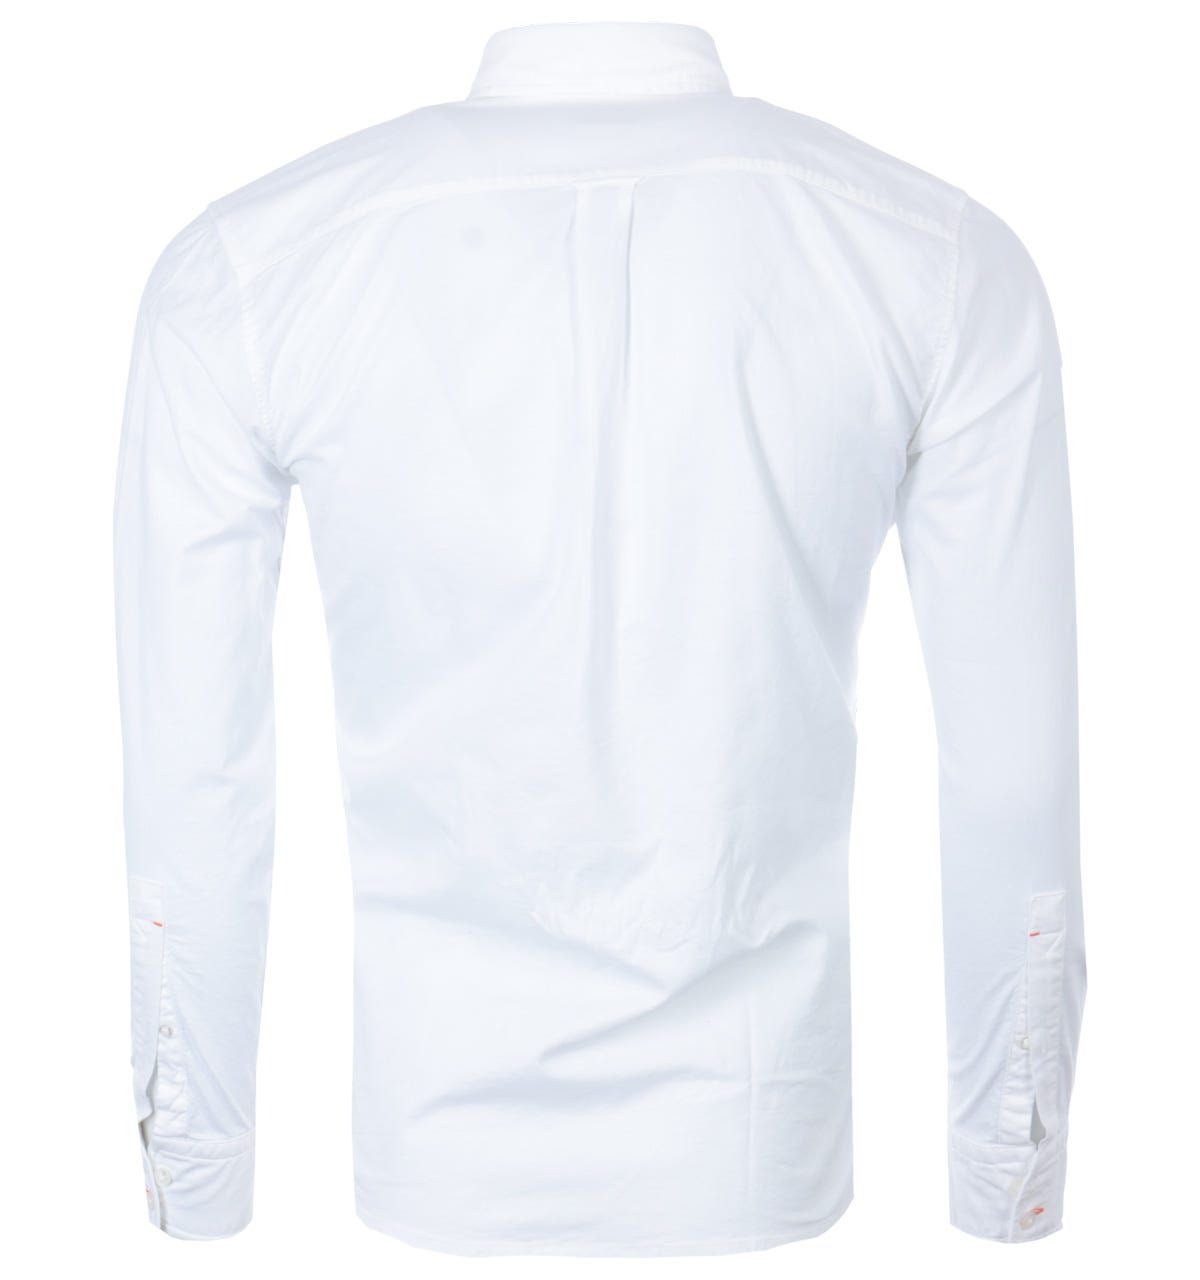 This casual long sleeve shirt from BOSS is crafted from an  oxford cotton. Featuring a classic collar, a full button closure and long sleeves with button cuffs. Finished with the iconic BOSS patch logo, at the chest.\nSlim Fit, Oxford Cotton, Classic Collar, Full Button Closure, Long Sleeve, Button Cuffs, Boss Branding. Style & Fit:Slim Fit, Fits True to Size. Composition & Care:98% Cotton, 2% Elastane, Machine Wash.